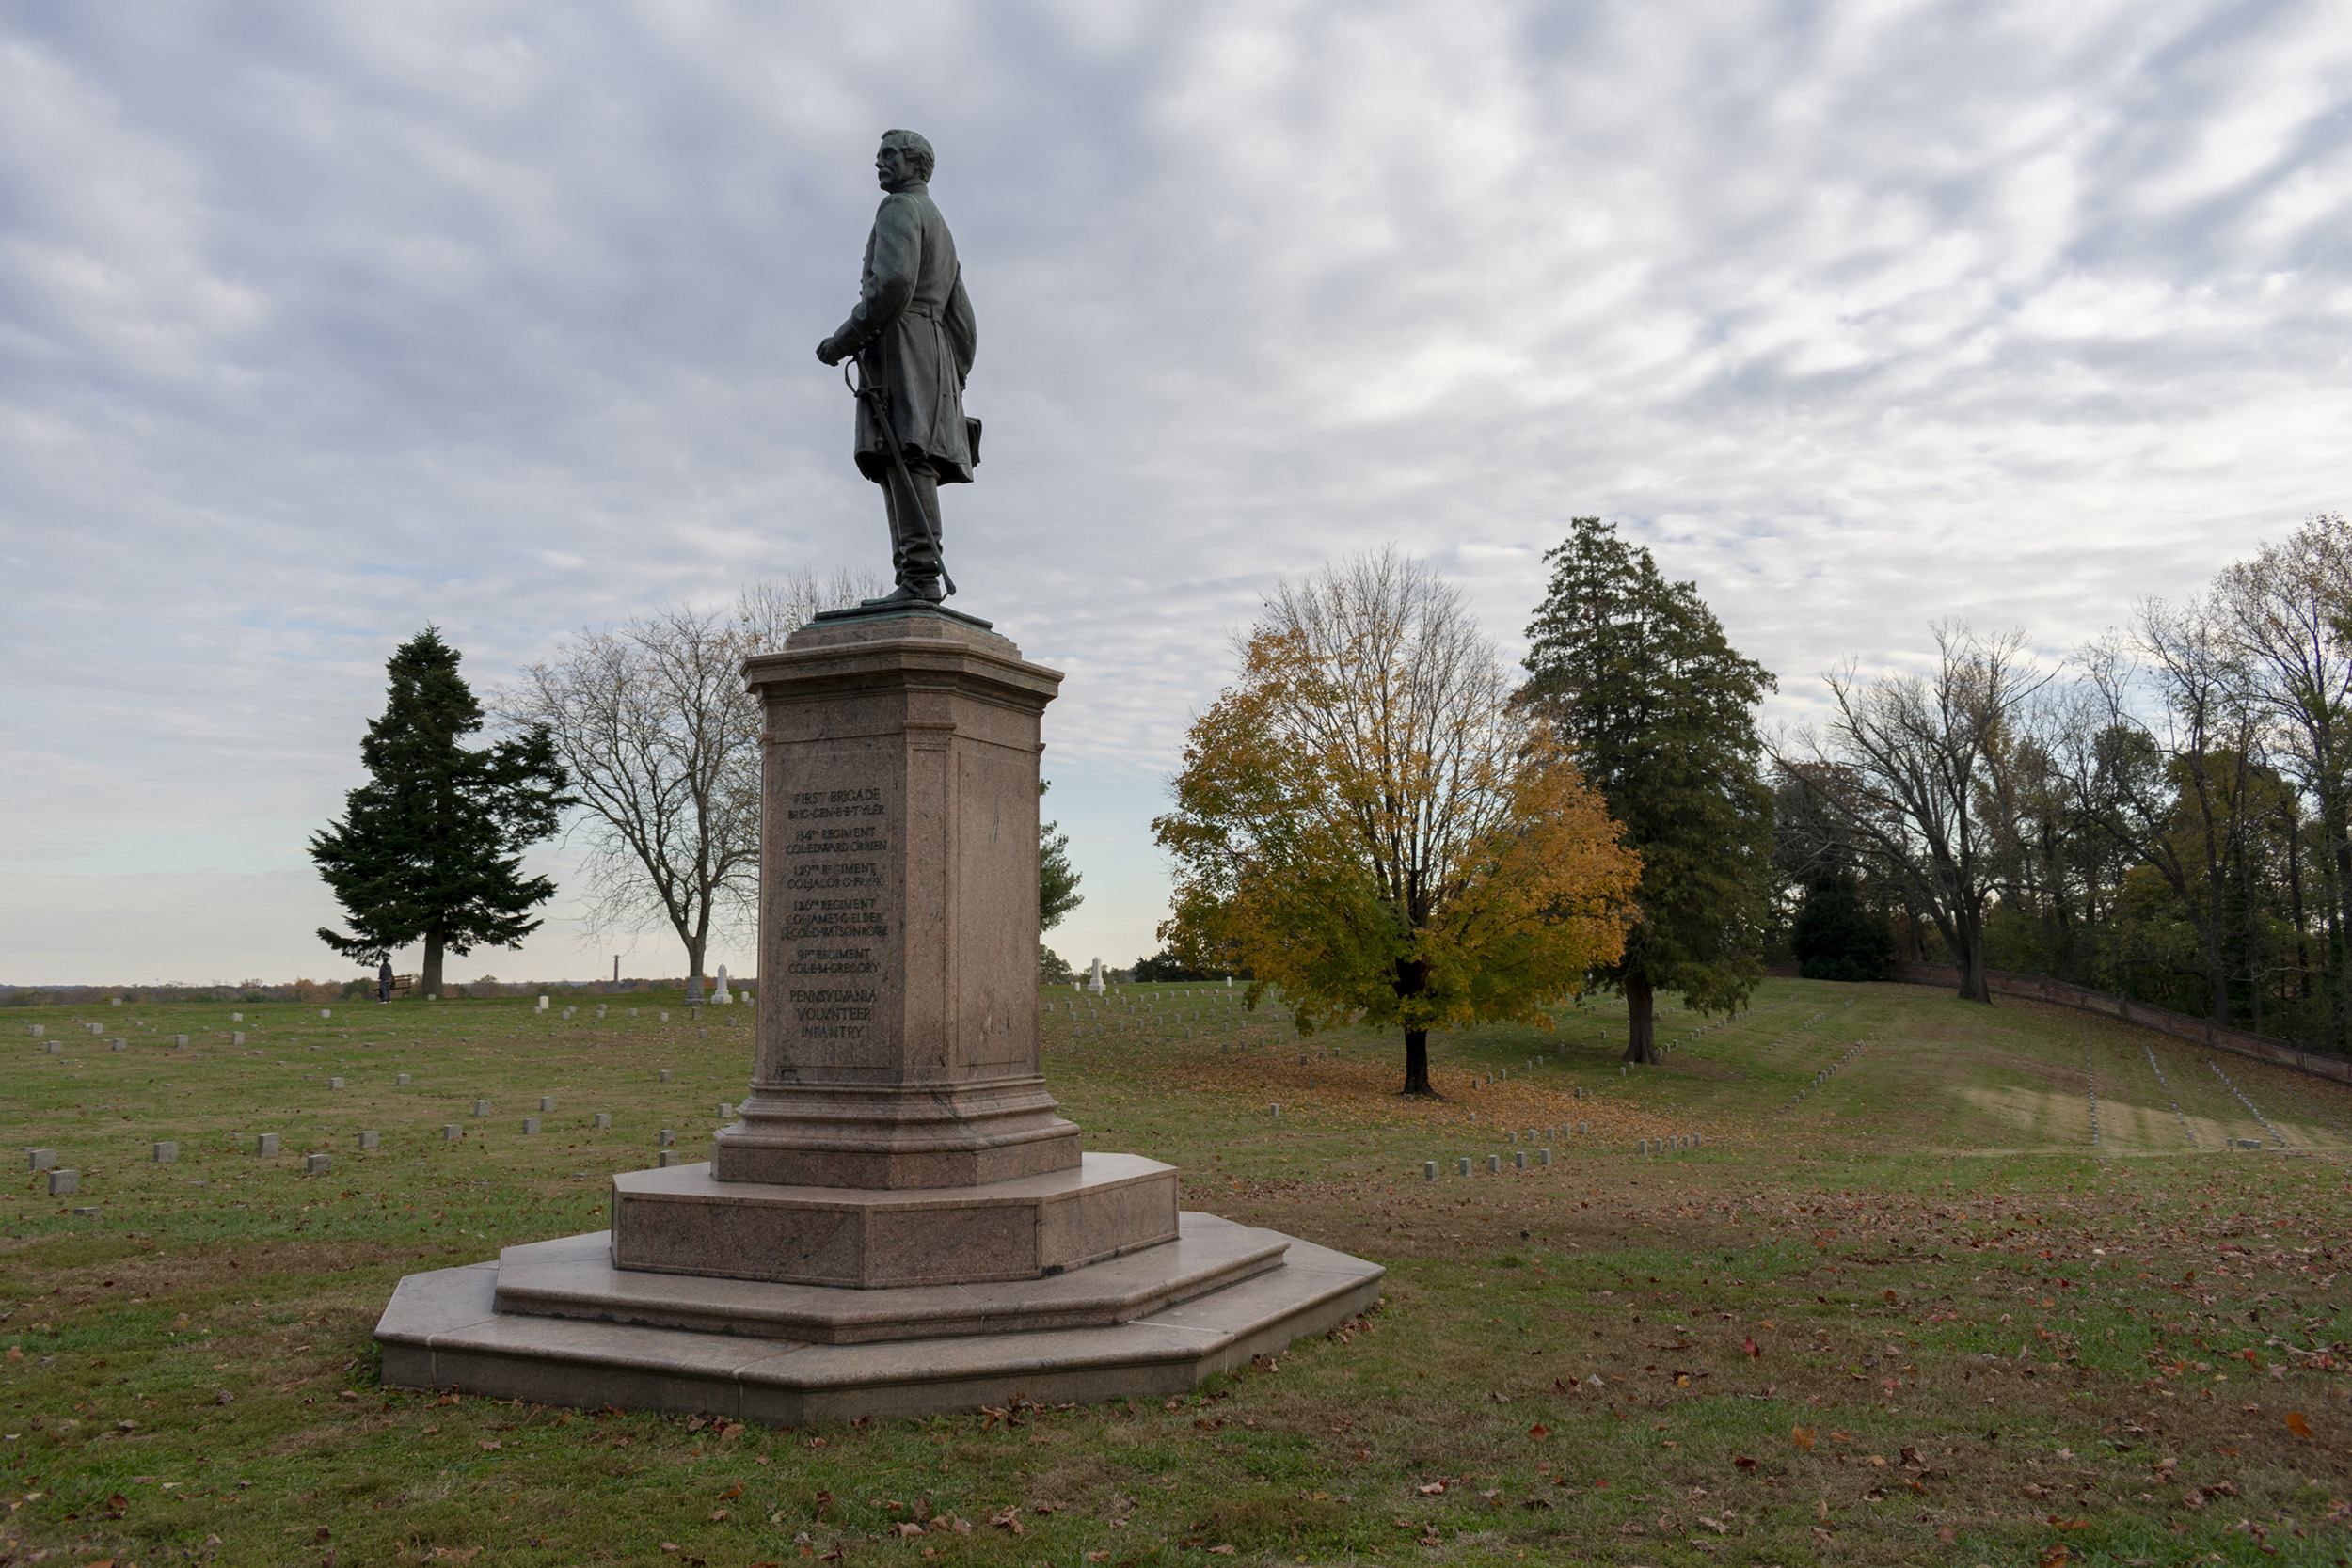 A bronze statue of a Union soldier in a cemetery.